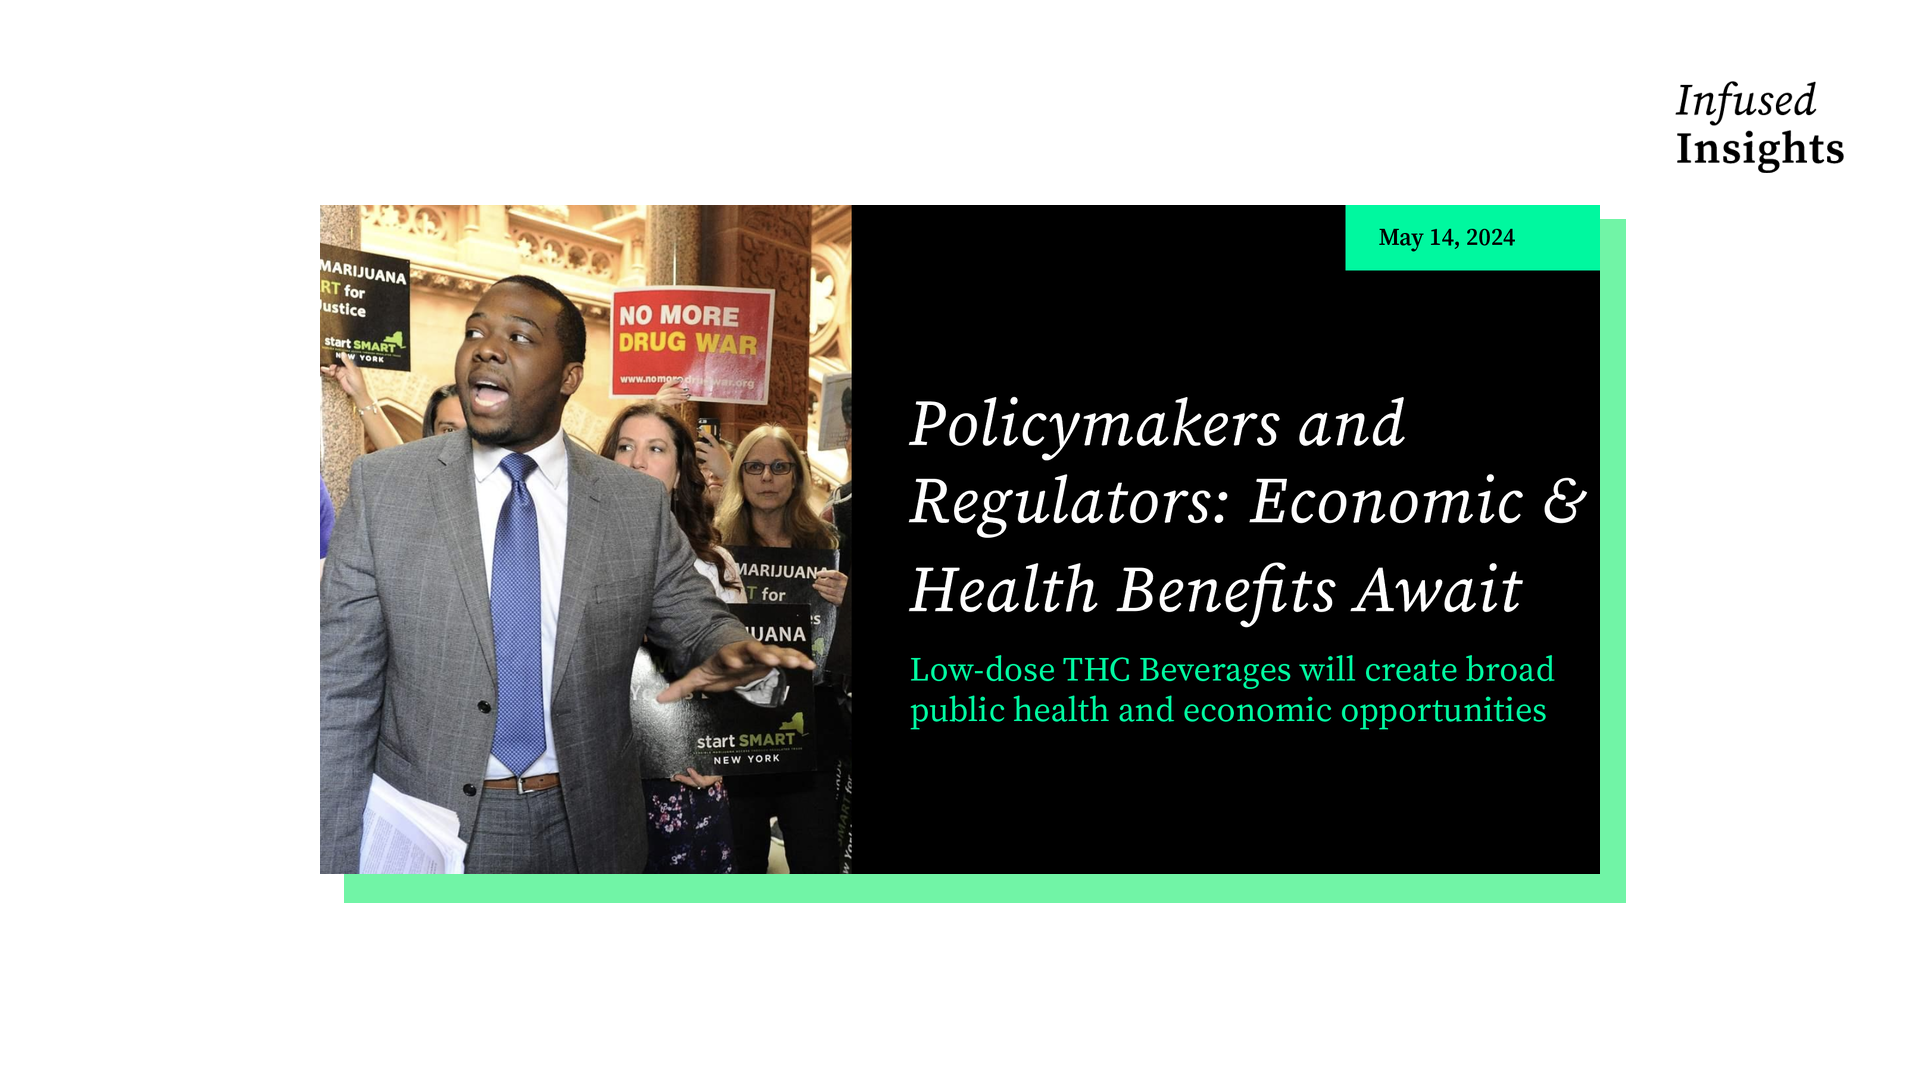 Policymakers and Regulators: Low-Dose THC Beverages Create Public Health and Economic Opportunities